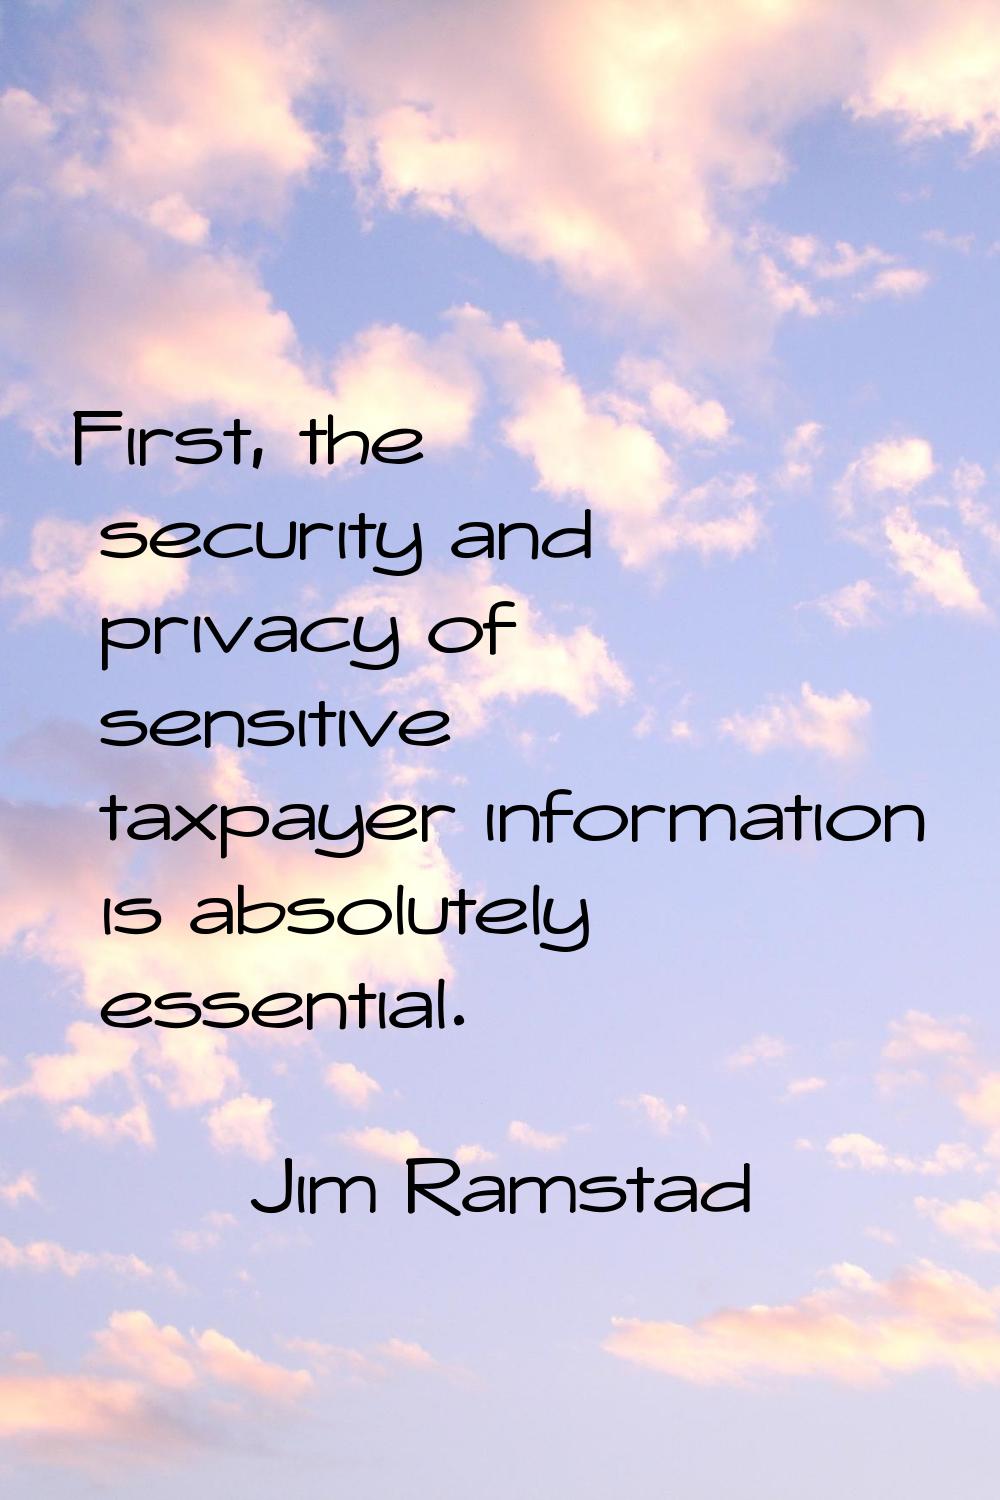 First, the security and privacy of sensitive taxpayer information is absolutely essential.